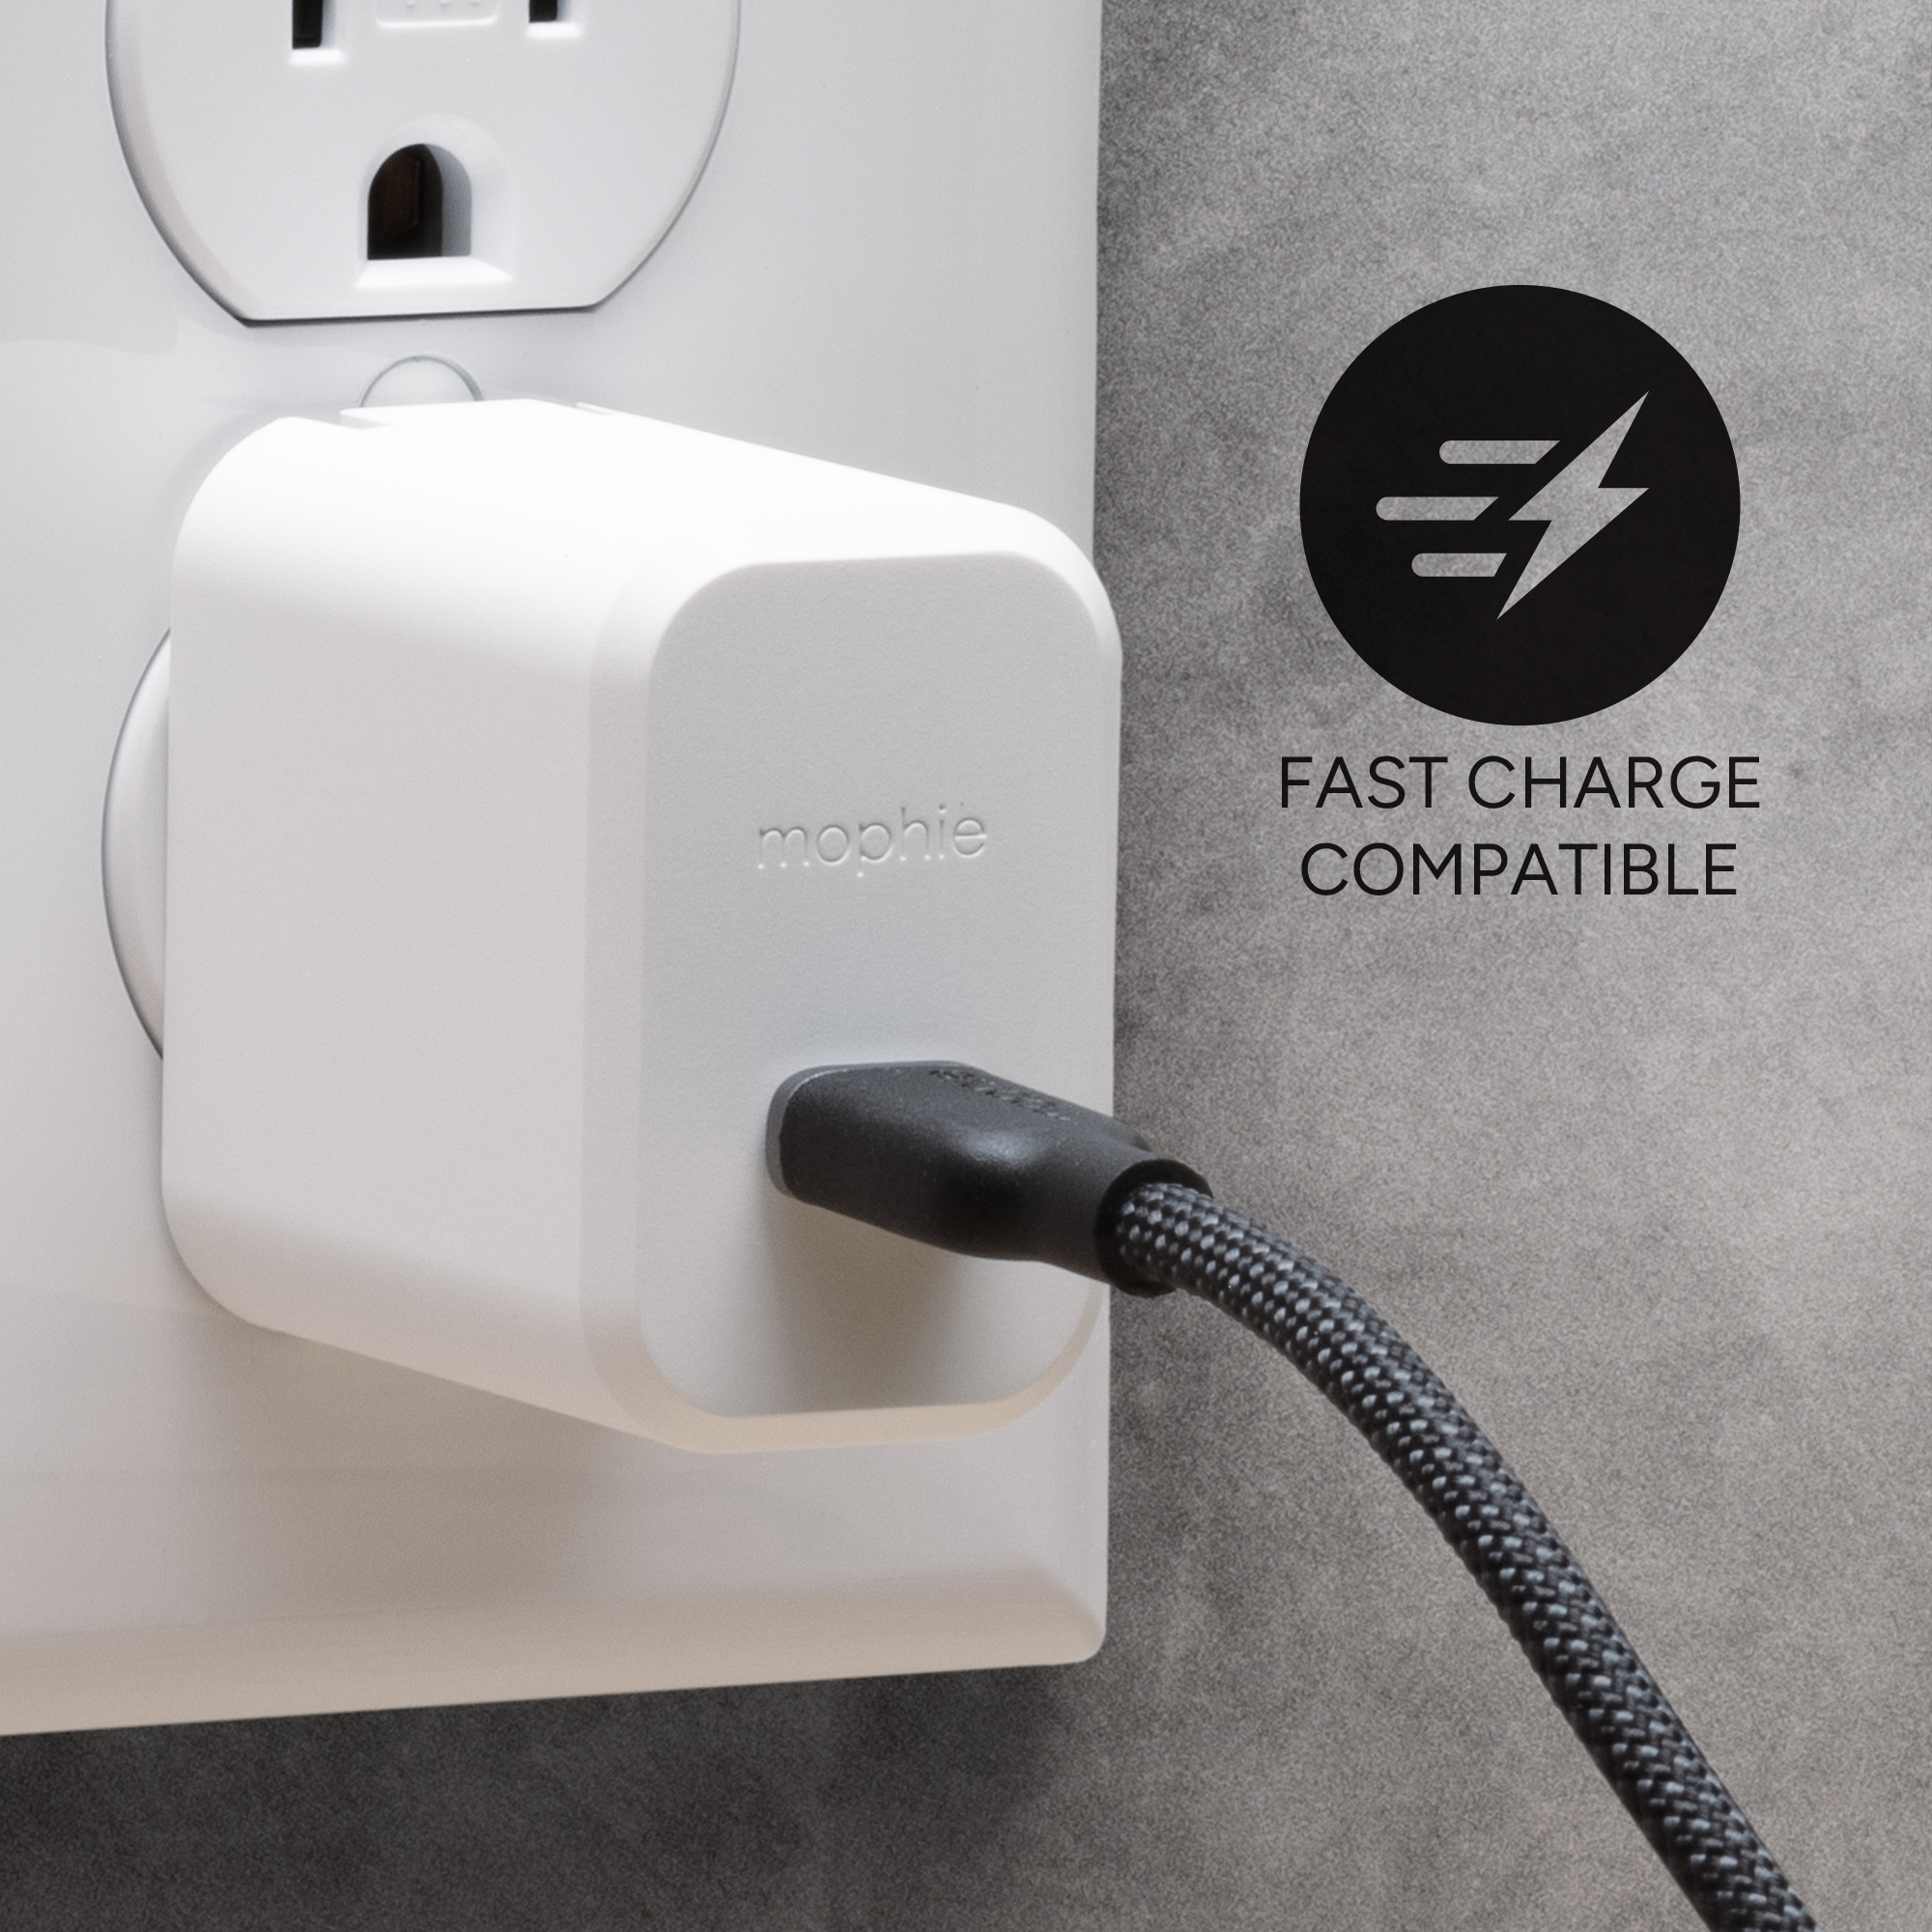 Fast Charge Compatible||
The charge stream® cables can be used with a PD charger for fast charging and data transfer.